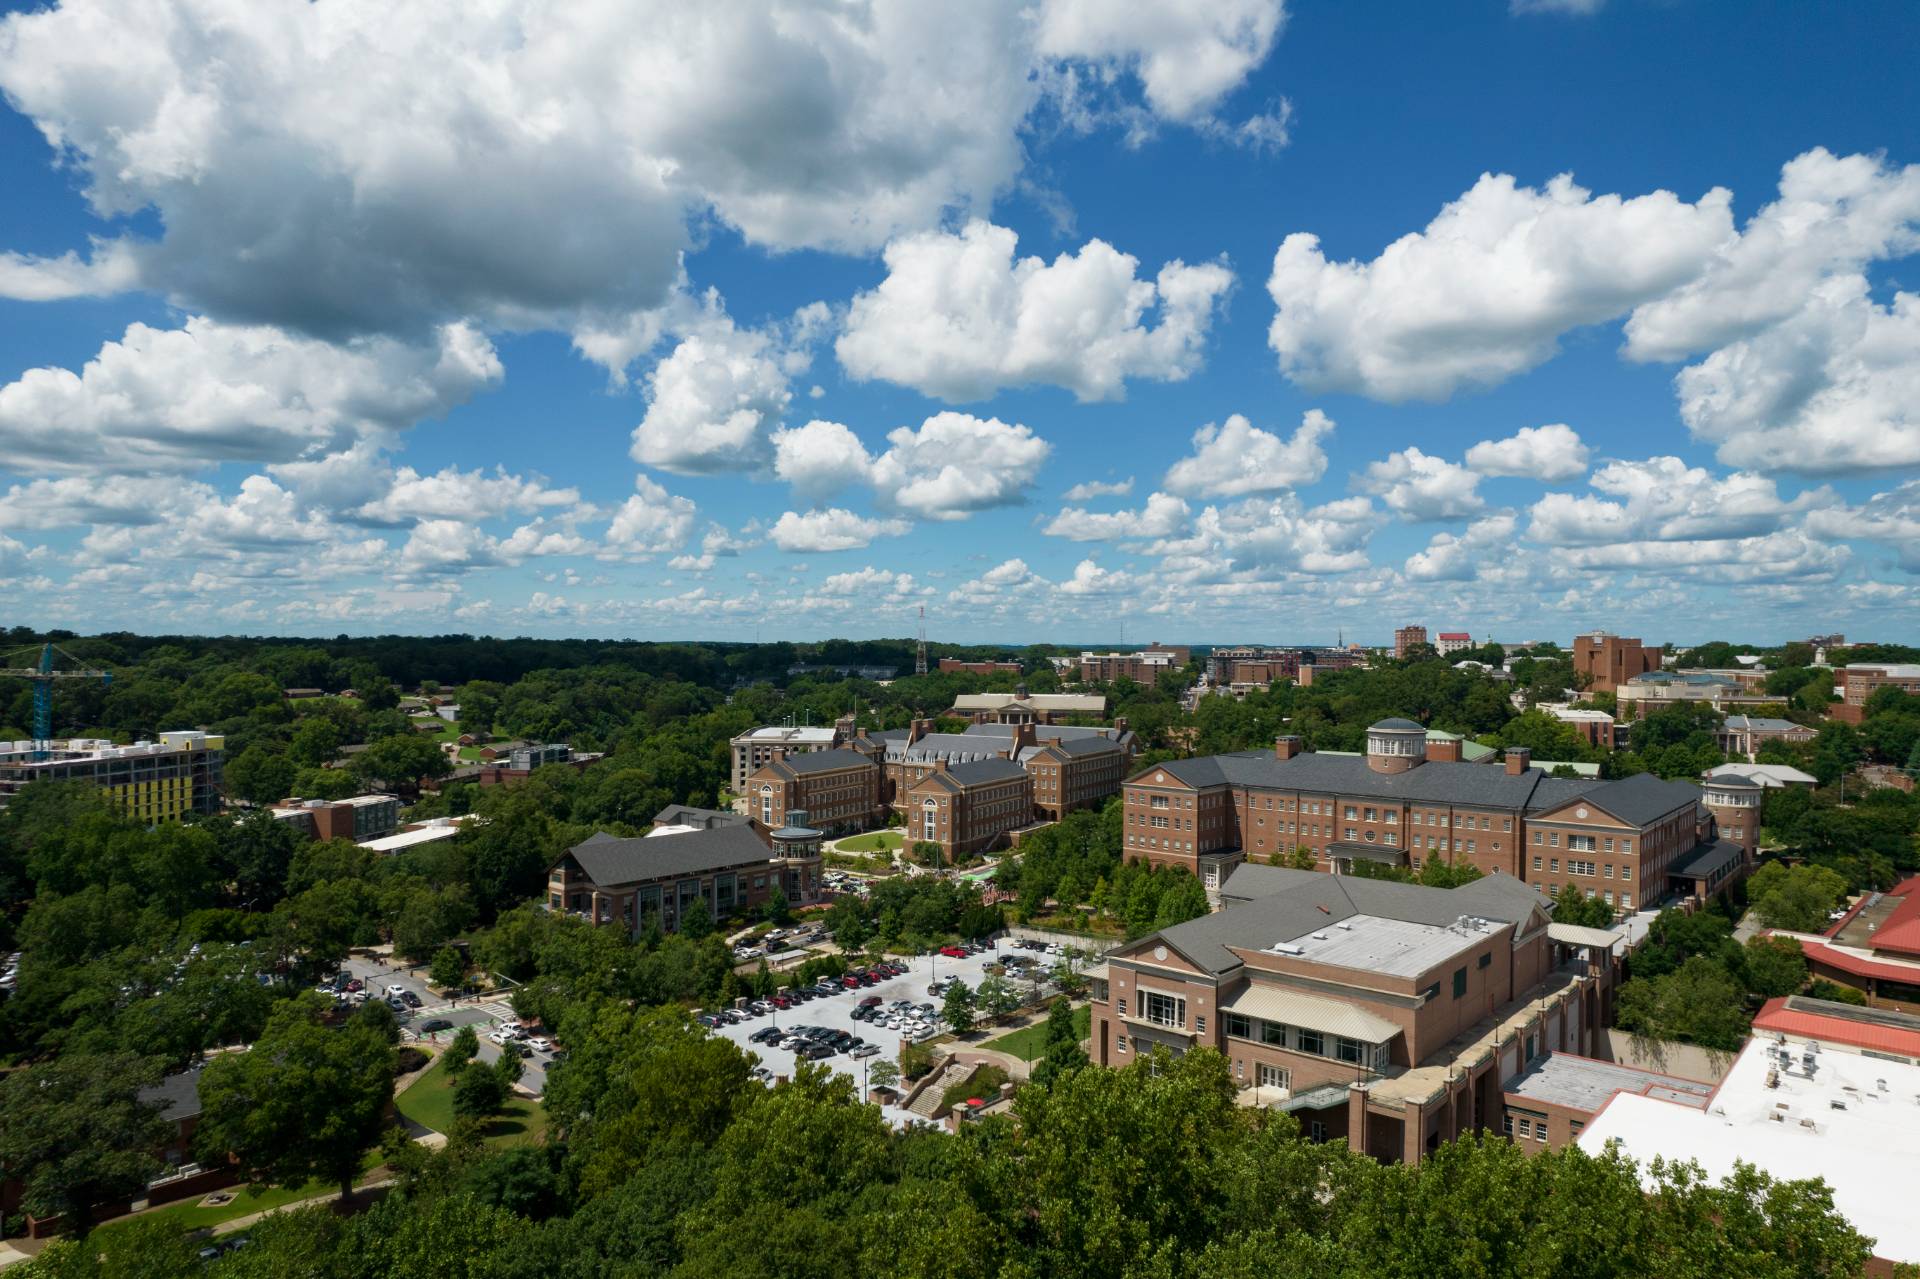 An aerial photograph of central campus including Tate, MLC, and the College of Business.